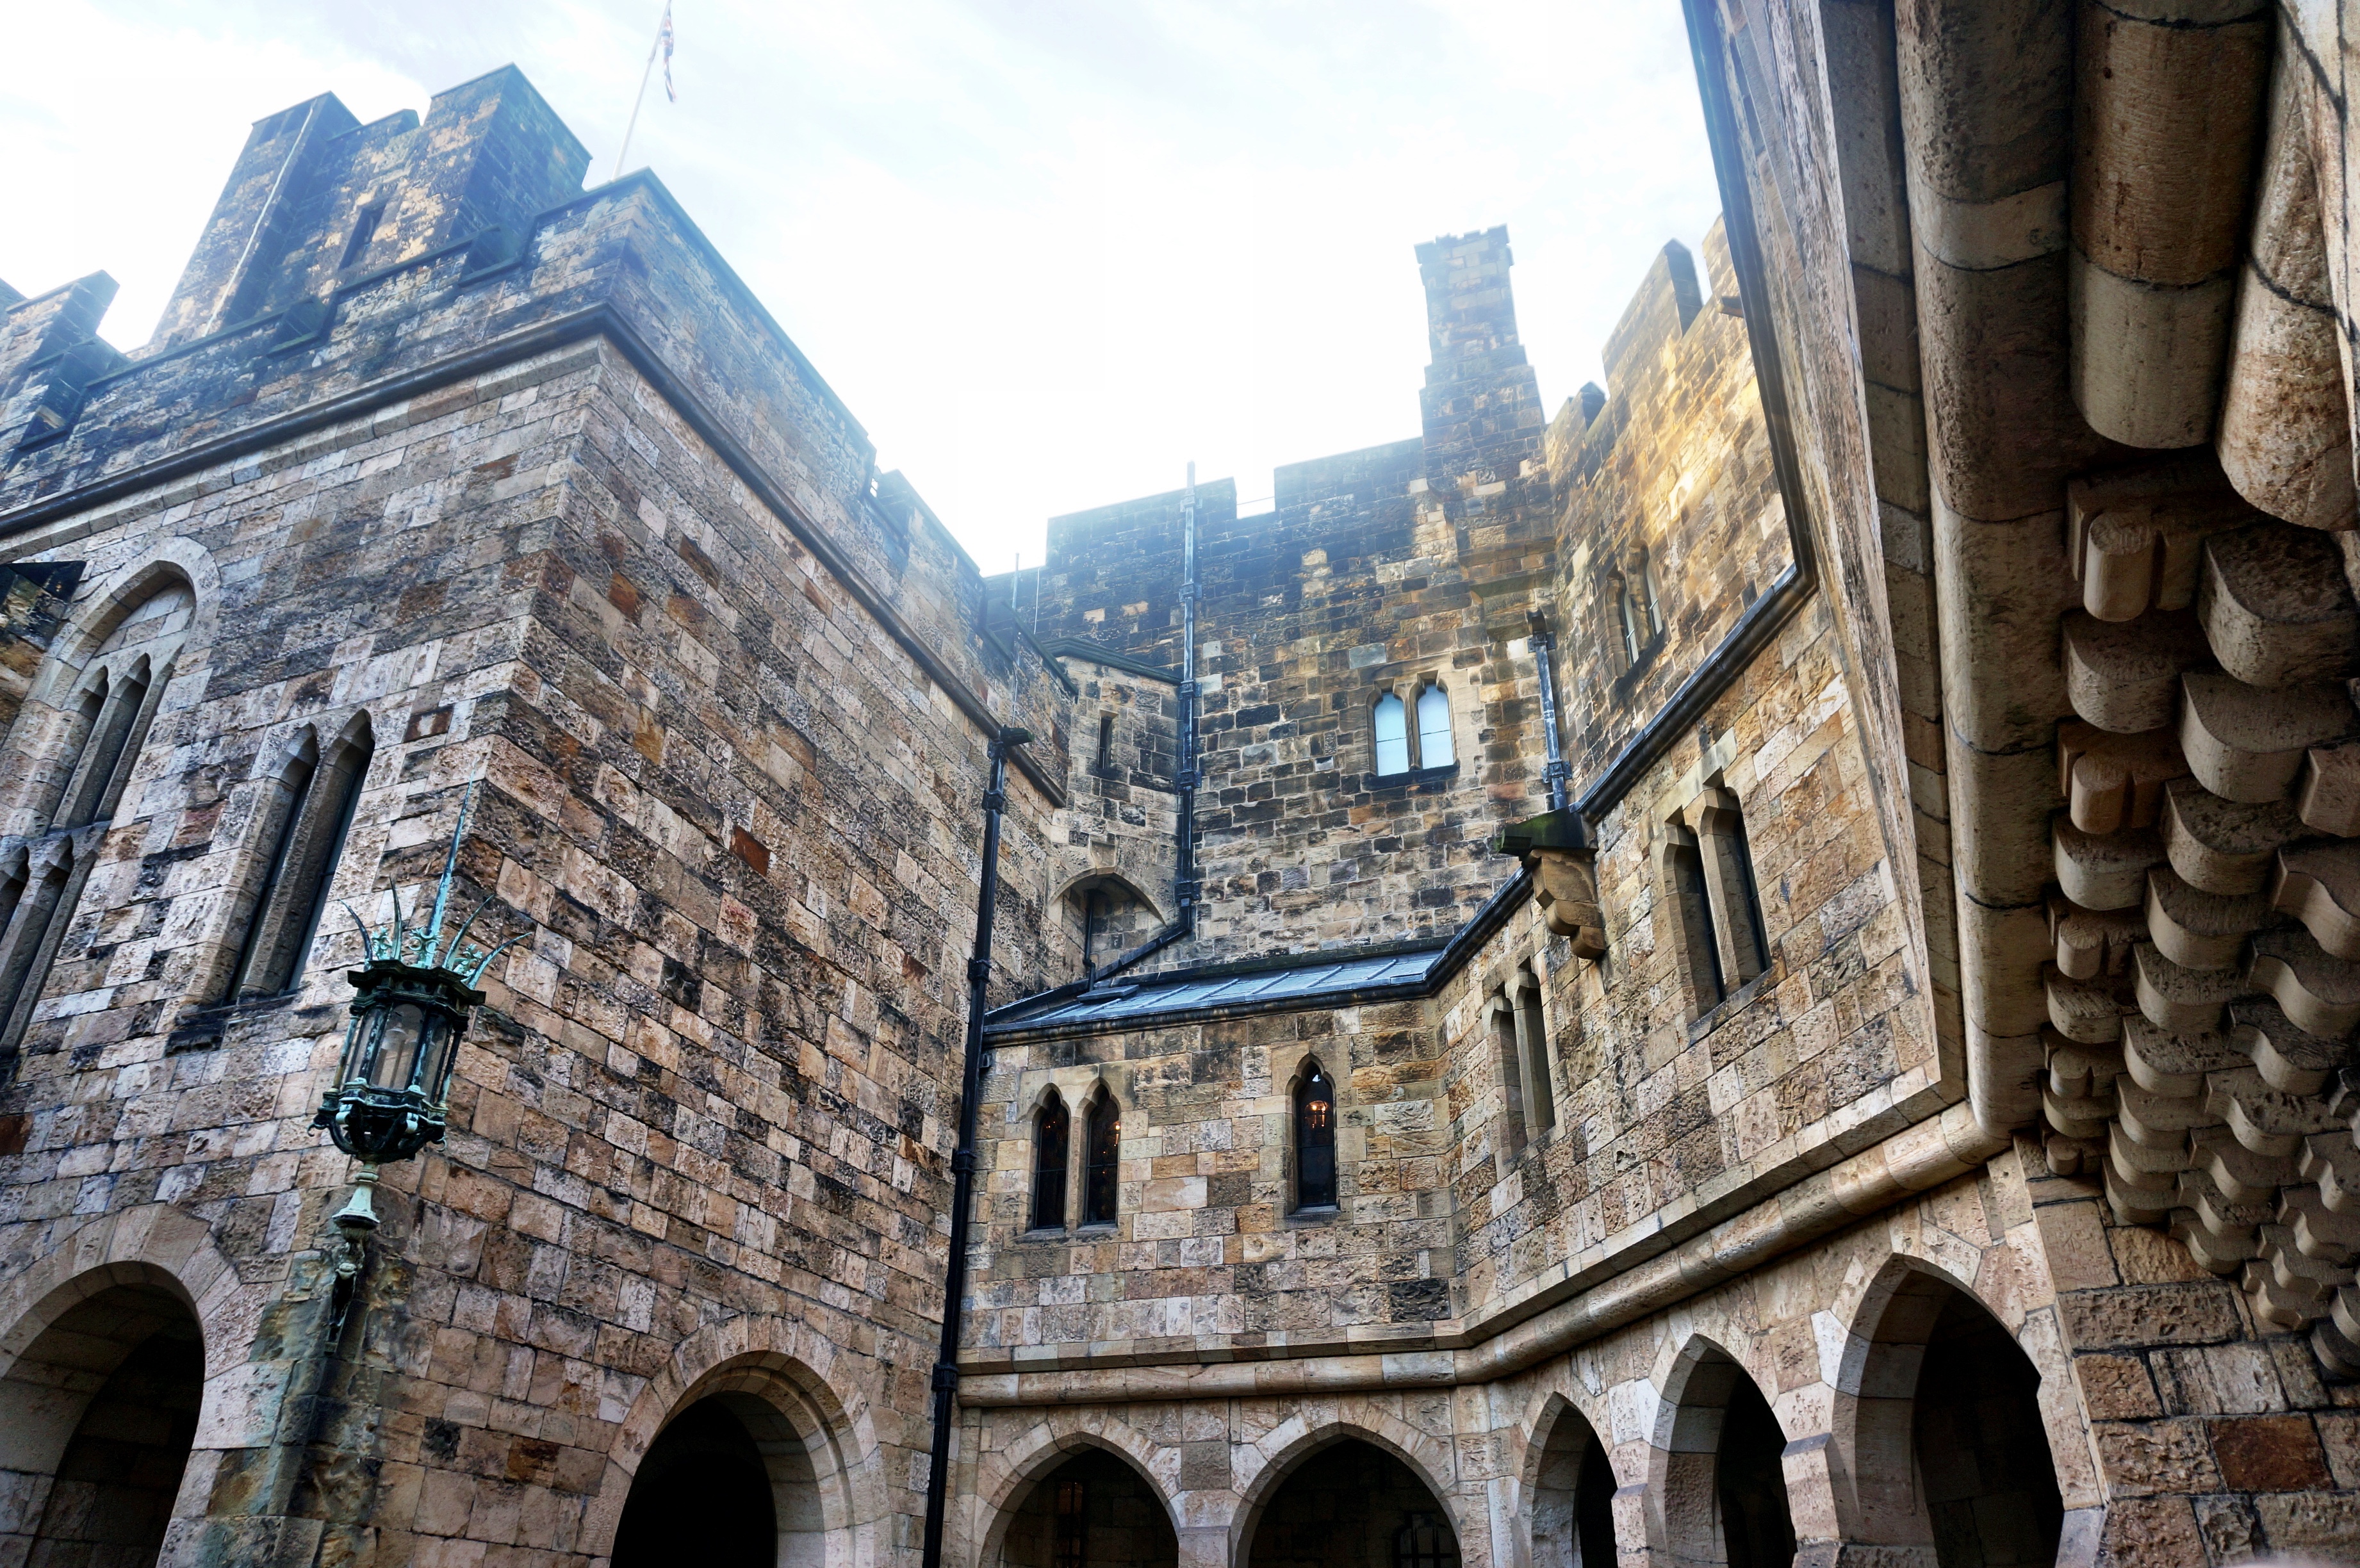 From palaces and Potter to lochs and Bond, there's so much to explore in and around Edinburgh, Scotland.